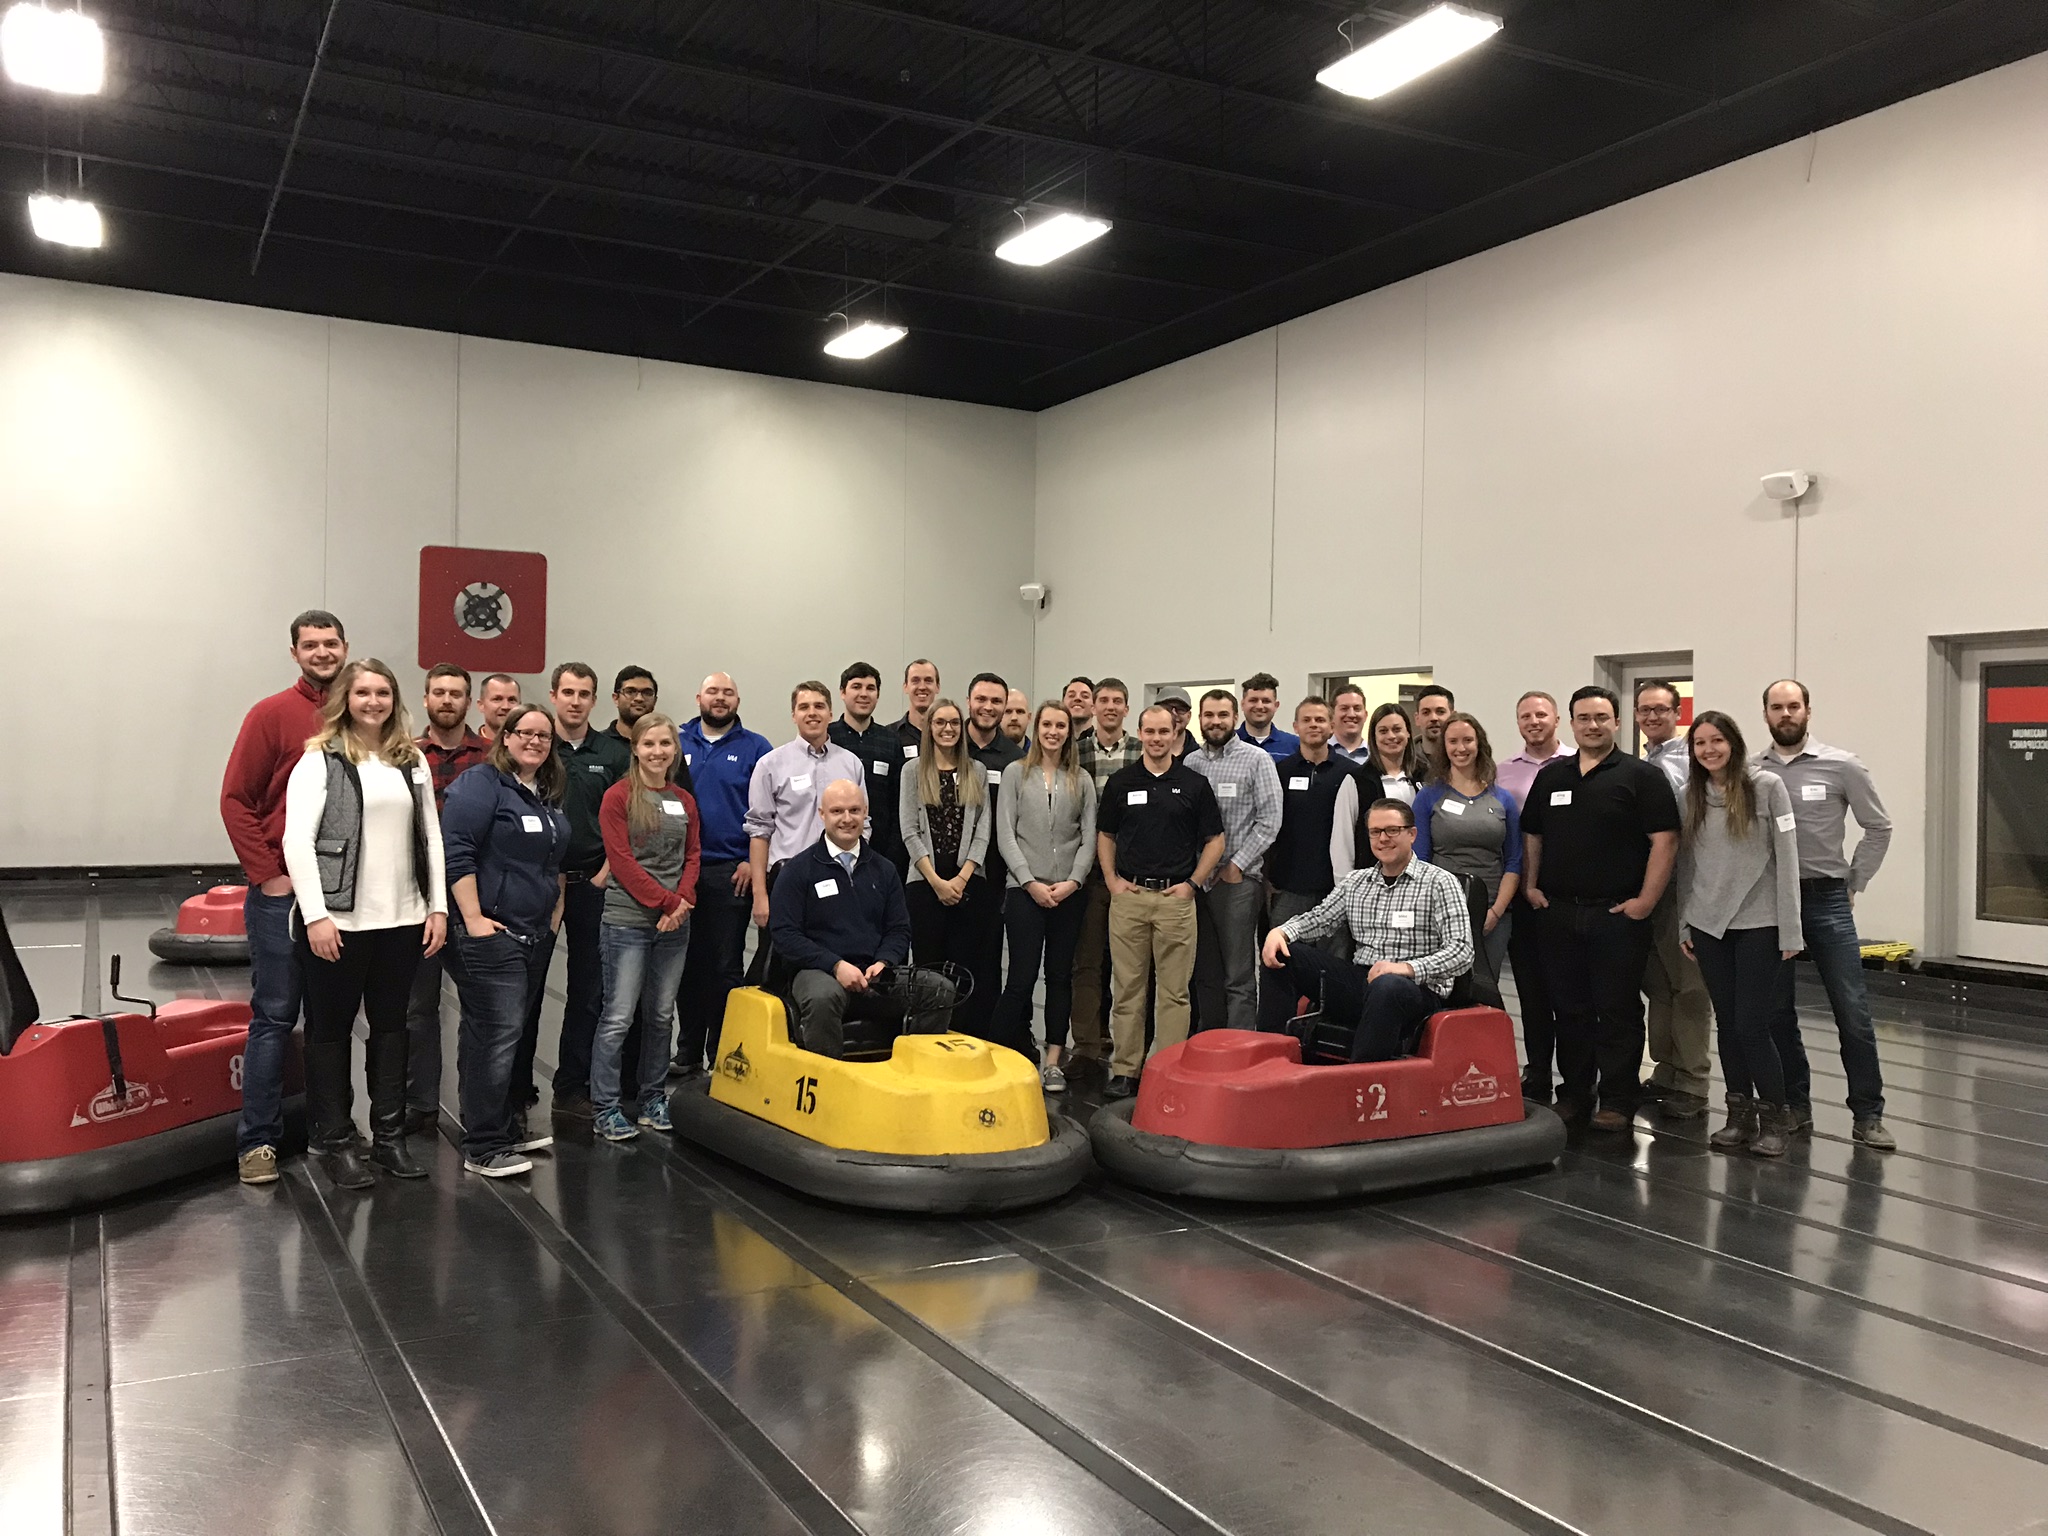 Younger Member Event Attendees Enjoy WhirlyBall